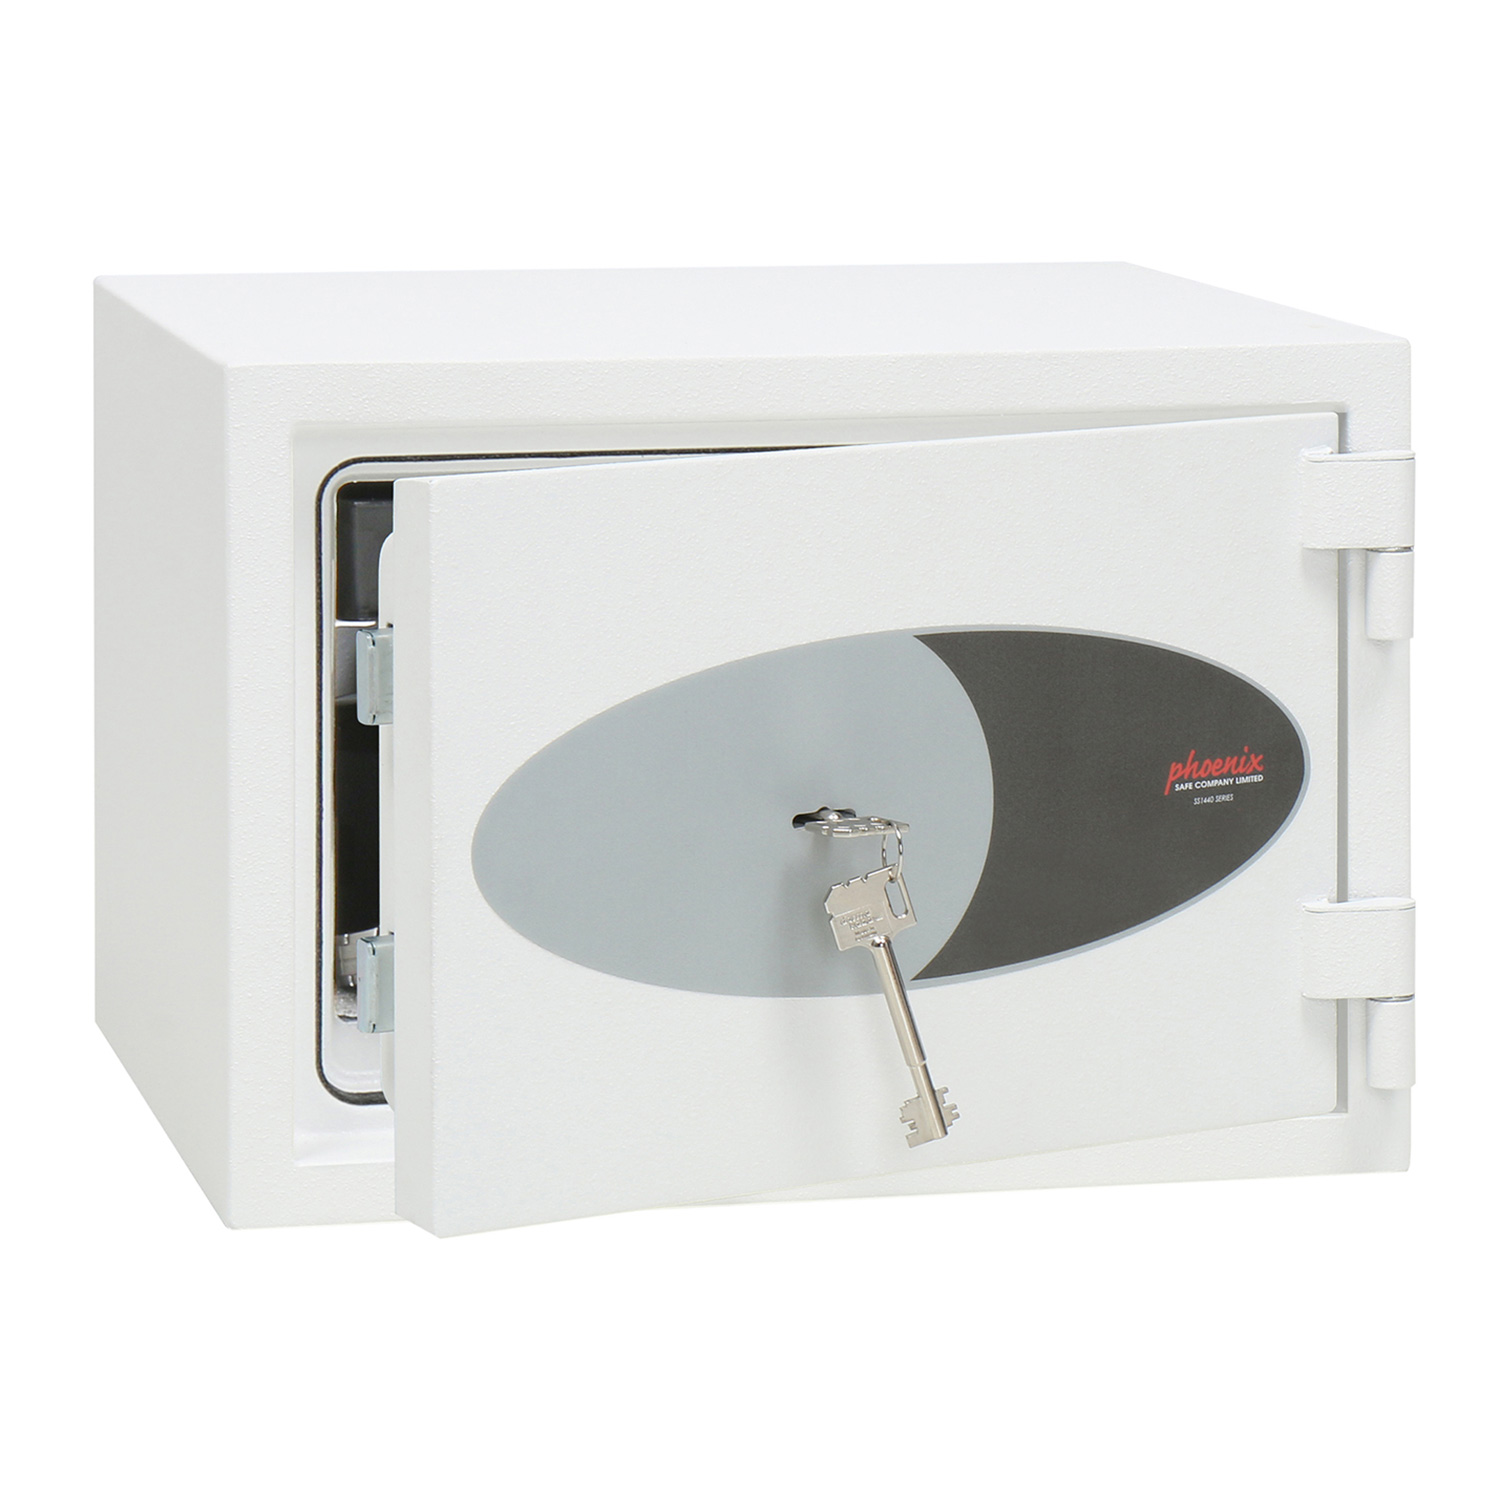 Phoenix Fortress Pro SS1441K Size 1 S2 Security Safe with Key Lock